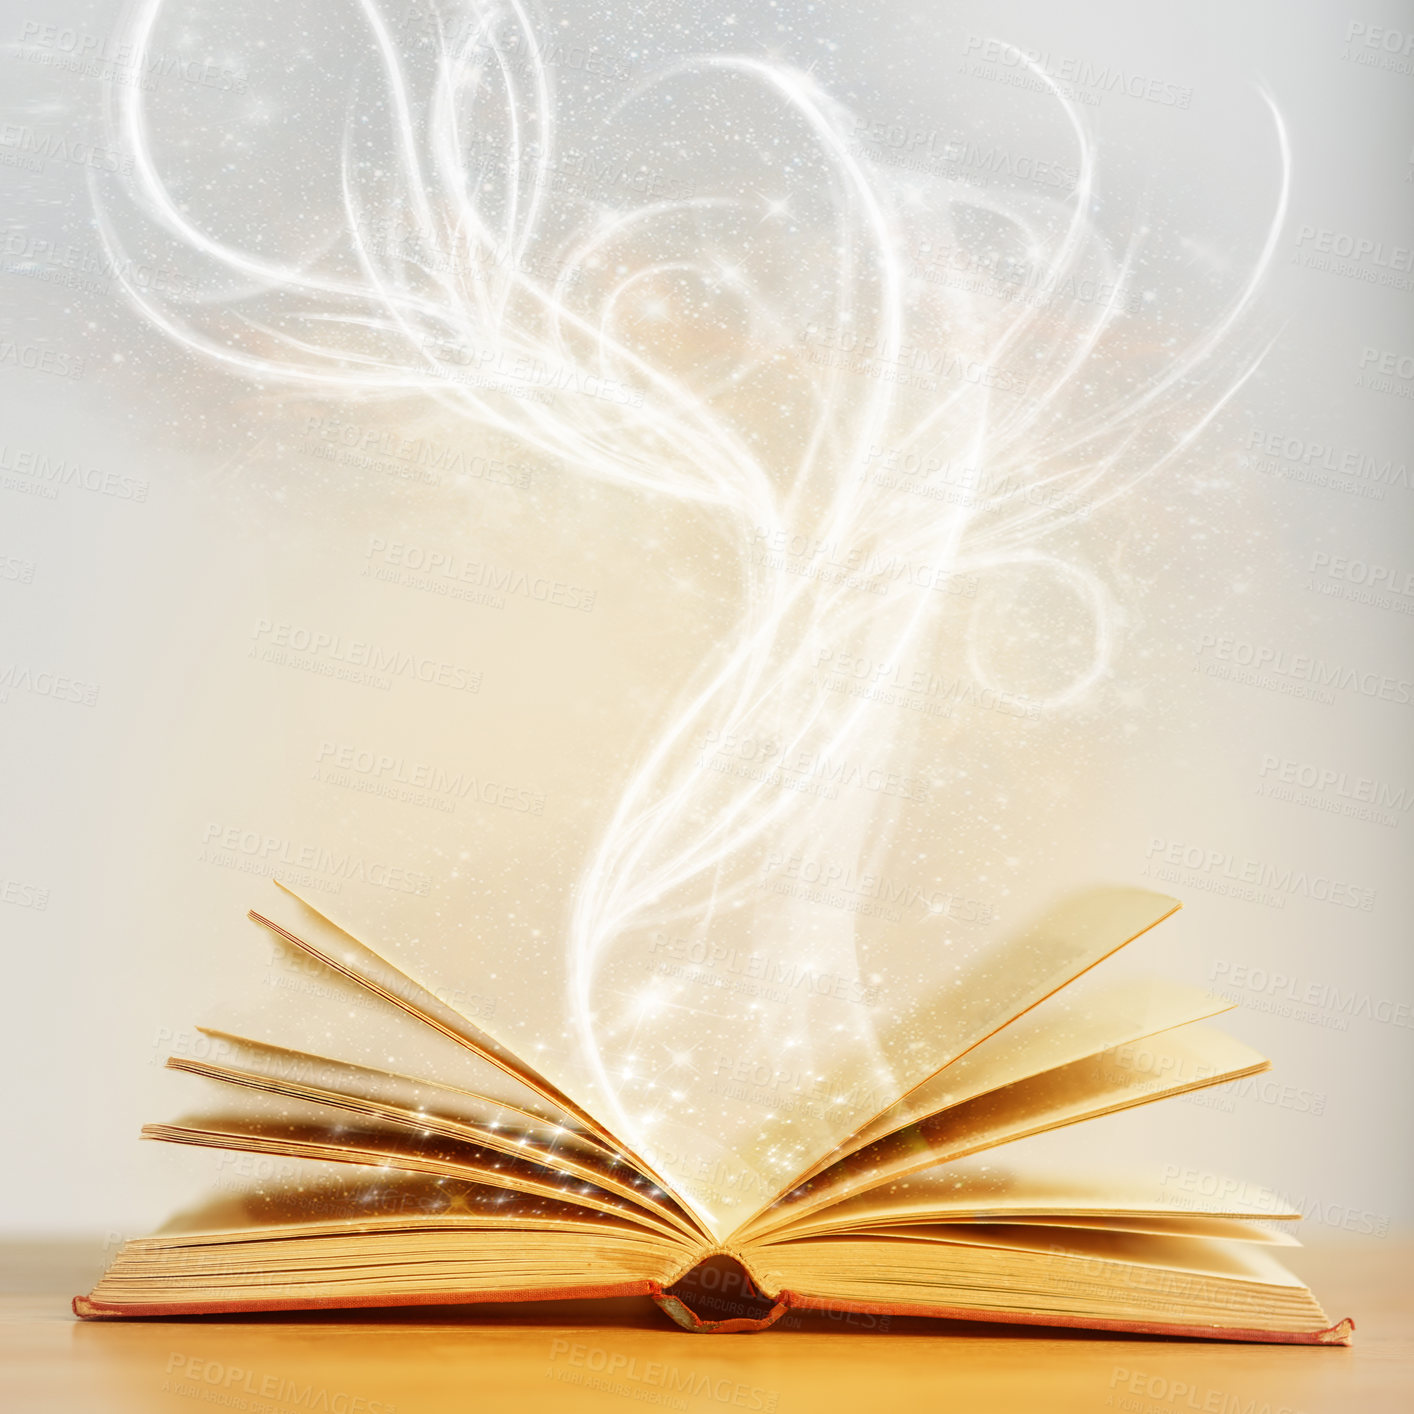 Buy stock photo Shot of an open book with sparkles coming out of it